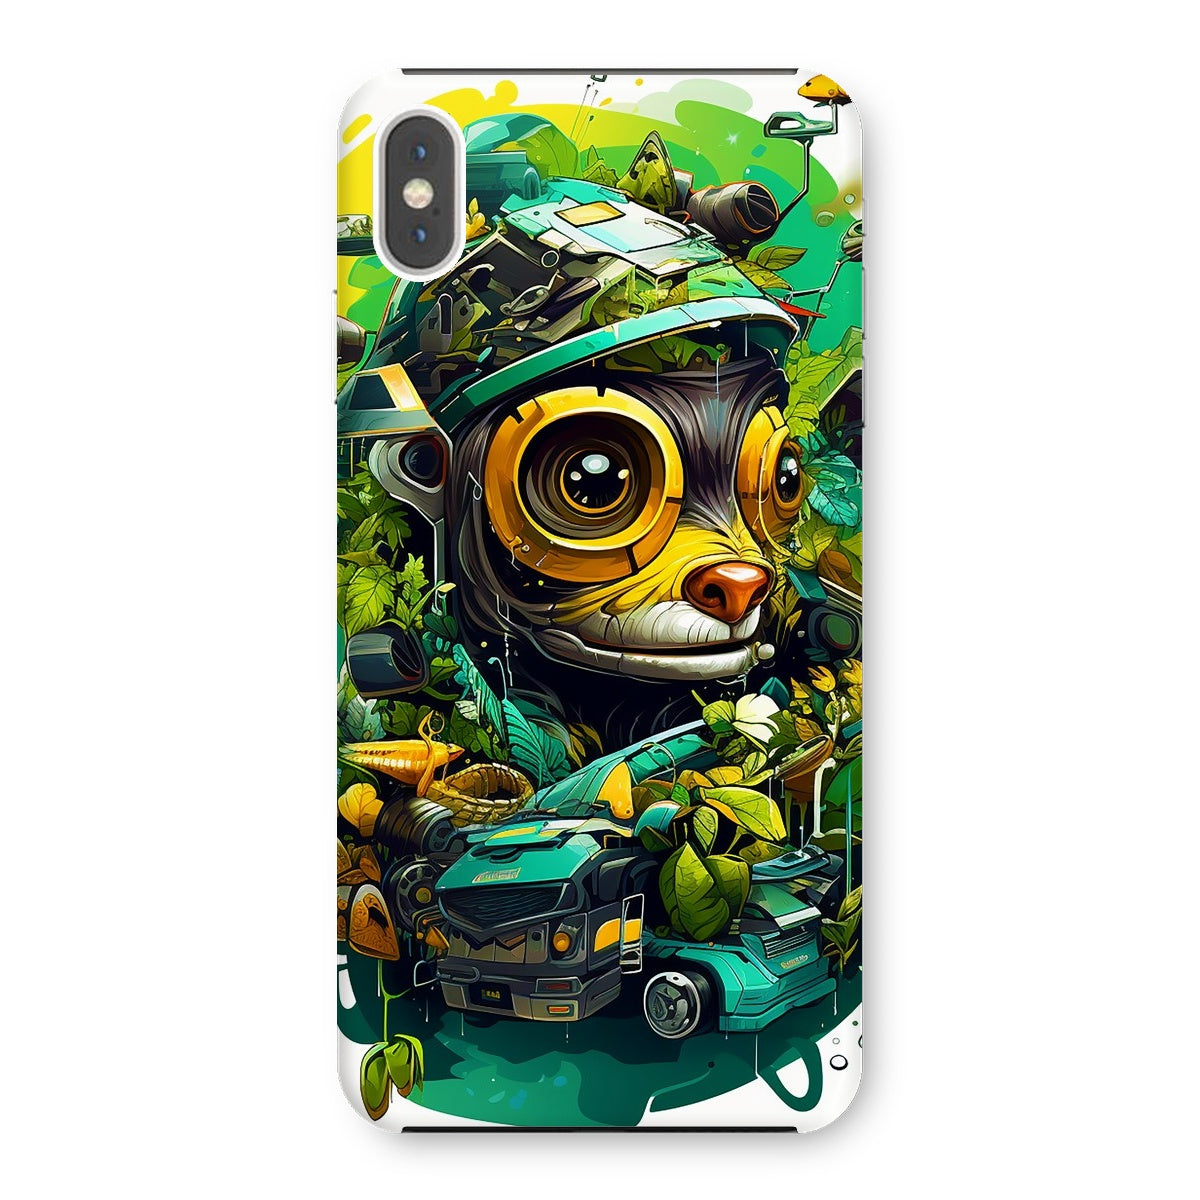 Nature's Resilience: Surreal Auto-Forest Artwork - Whimsical Raccoon and Greenery Infused Car  Snap Phone Case